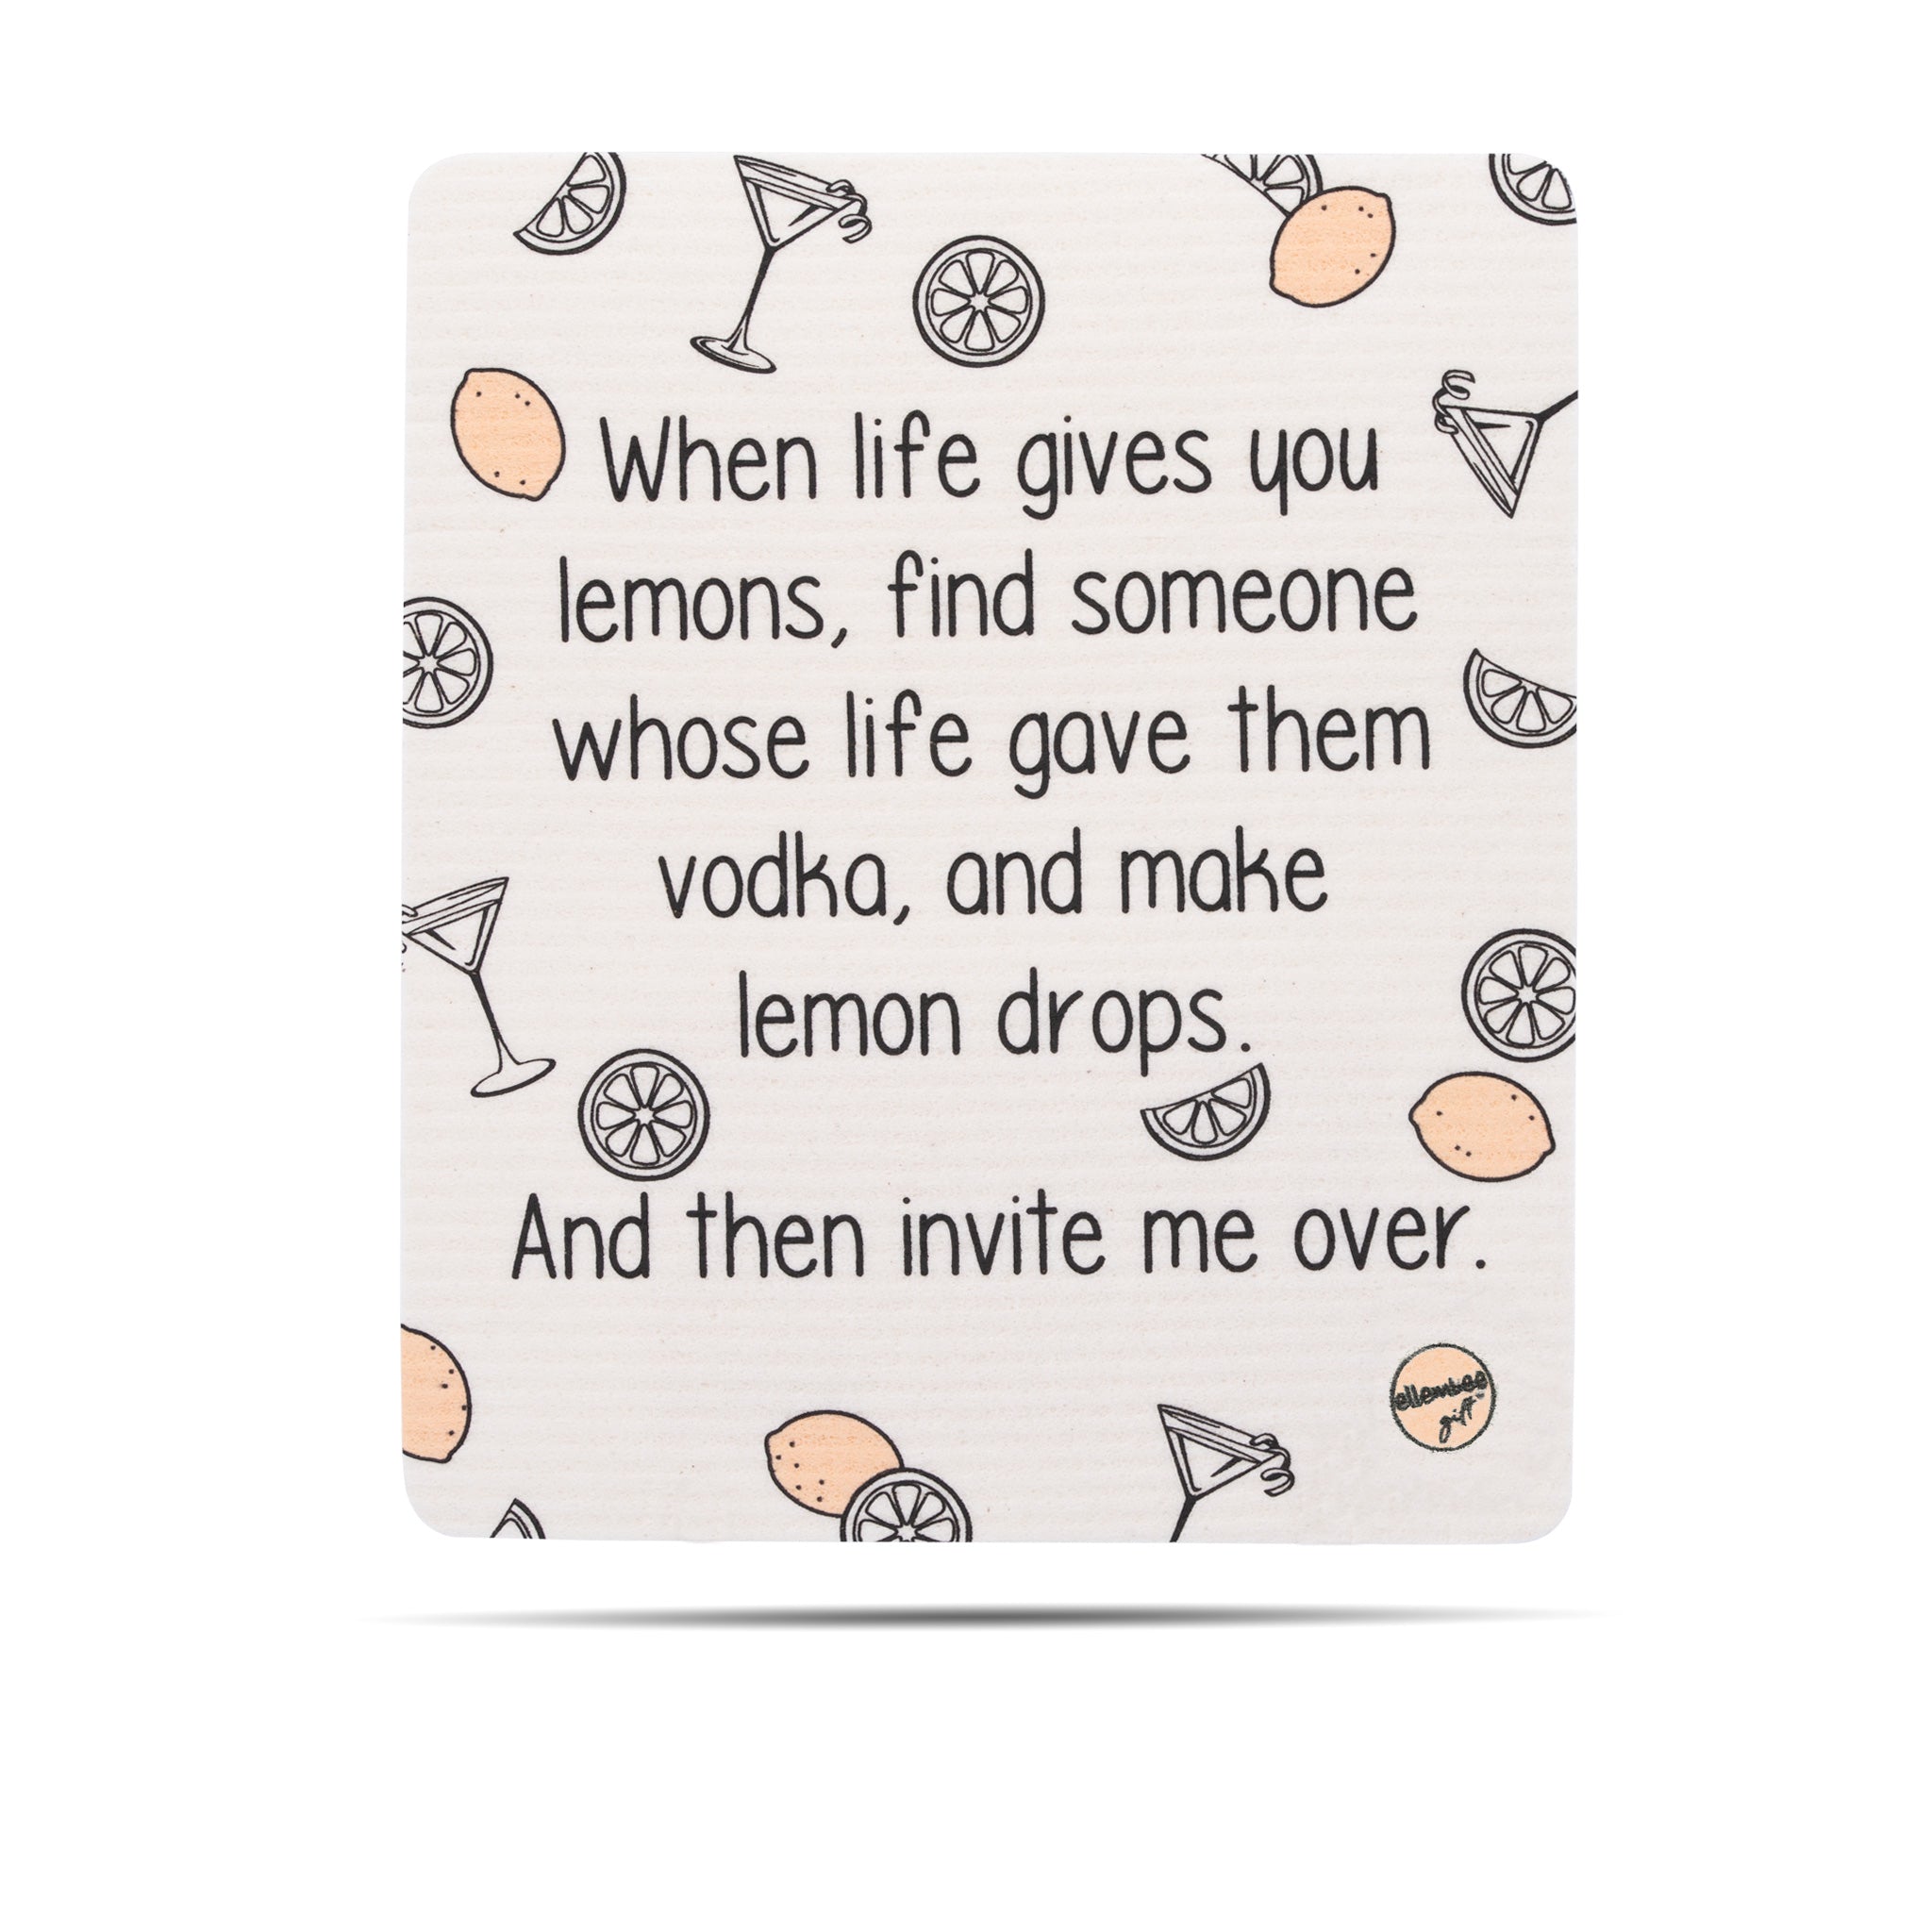 When life gives you lemons, find someone whose life gave them vodka, and make lemon drops. And then invite me over. Swedish dishcloth